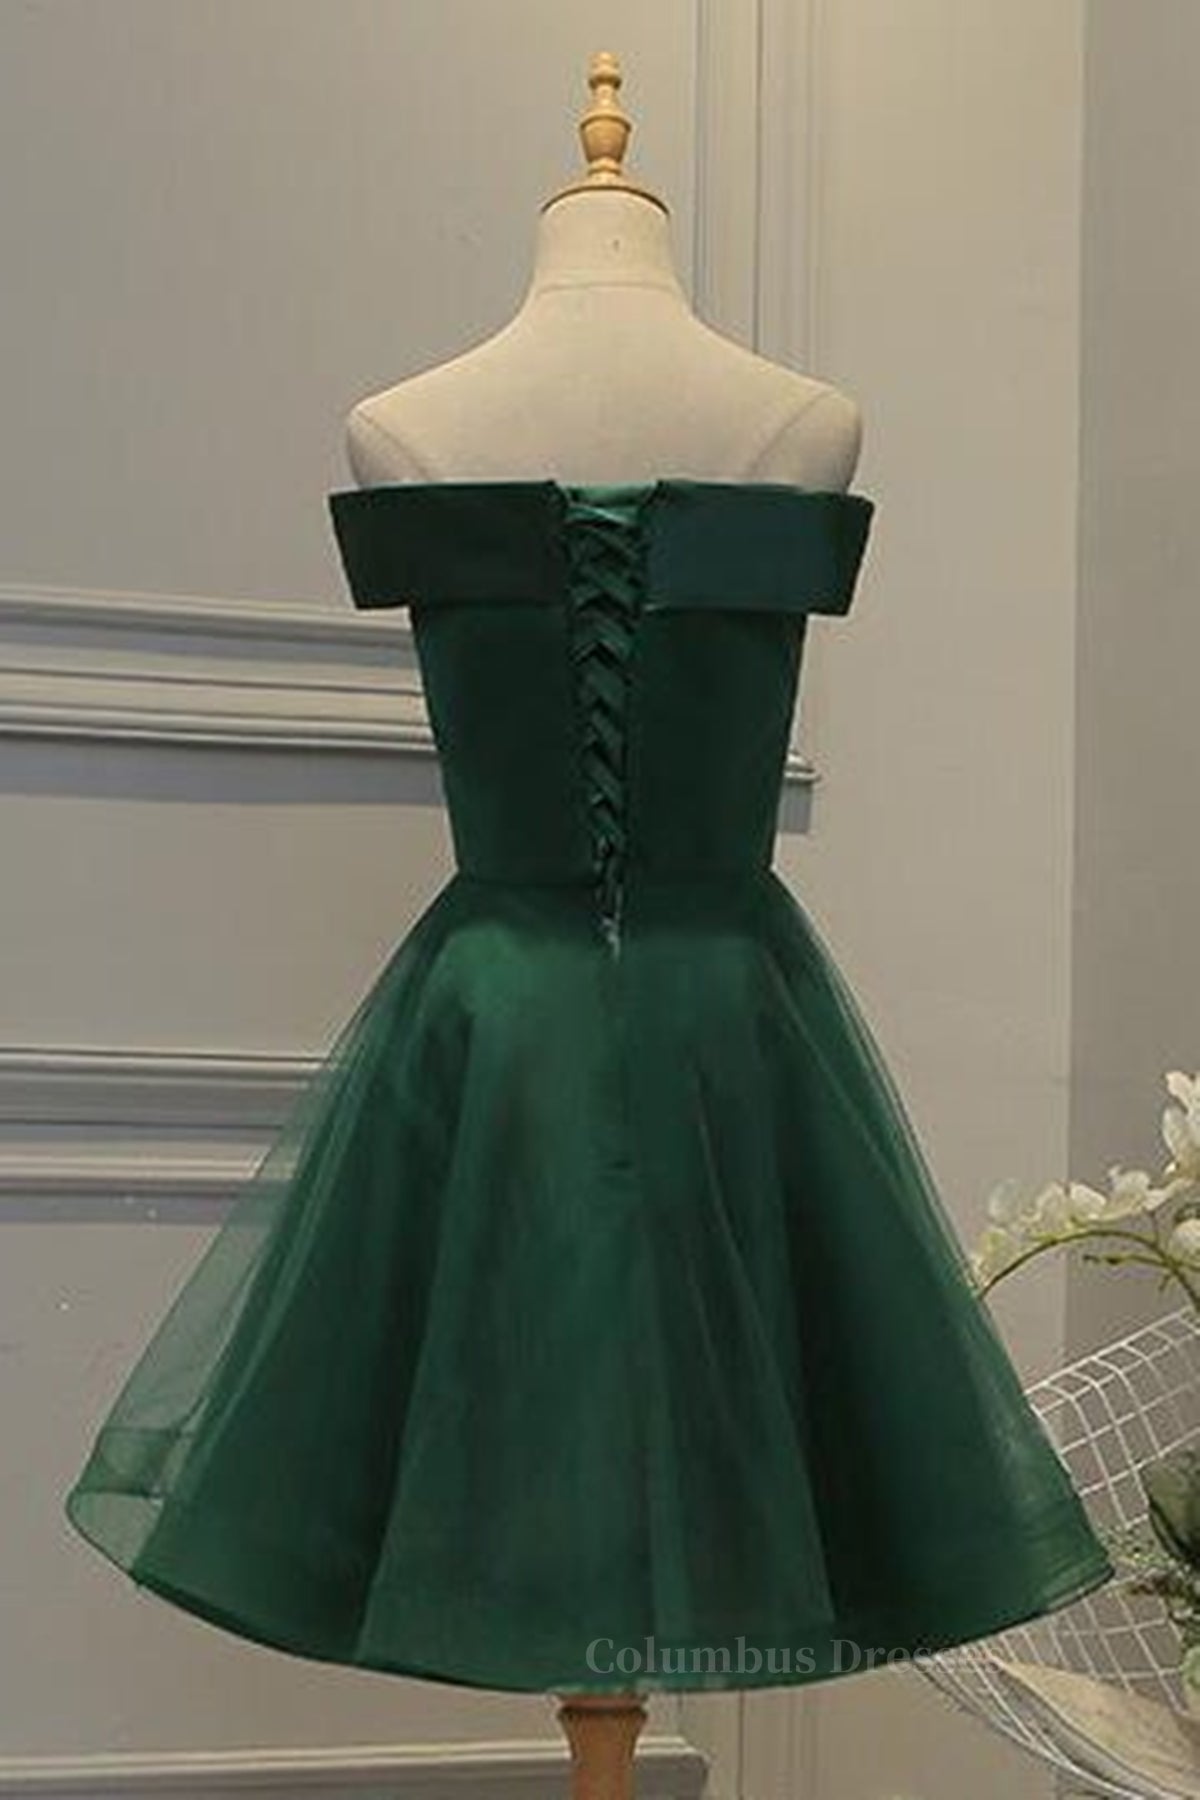 Bridesmaid Dresses Long Sleeve, Off Shoulder Green Lace Floral Prom Dress, Short Green Lace Homecoming Dress, Green Formal Evening Dress